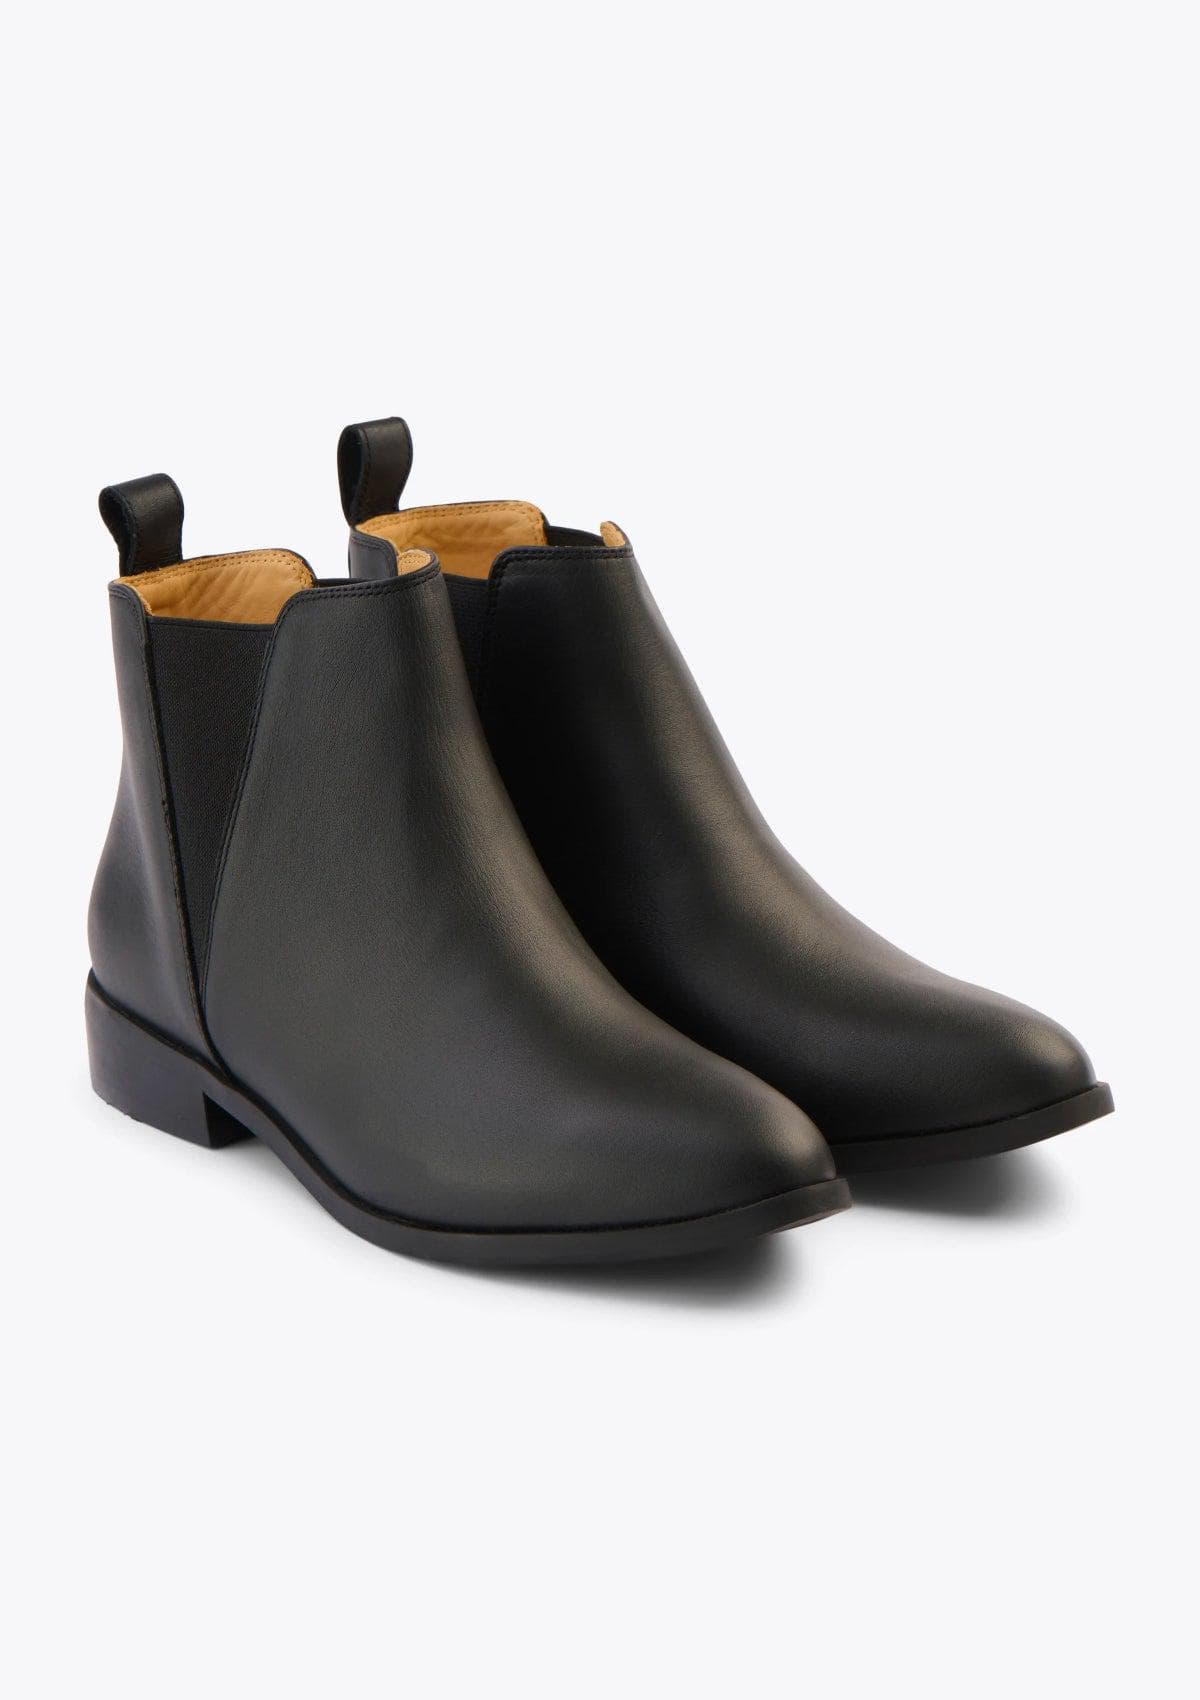 Nisolo Everyday Chelsea Boot - Commuter Black